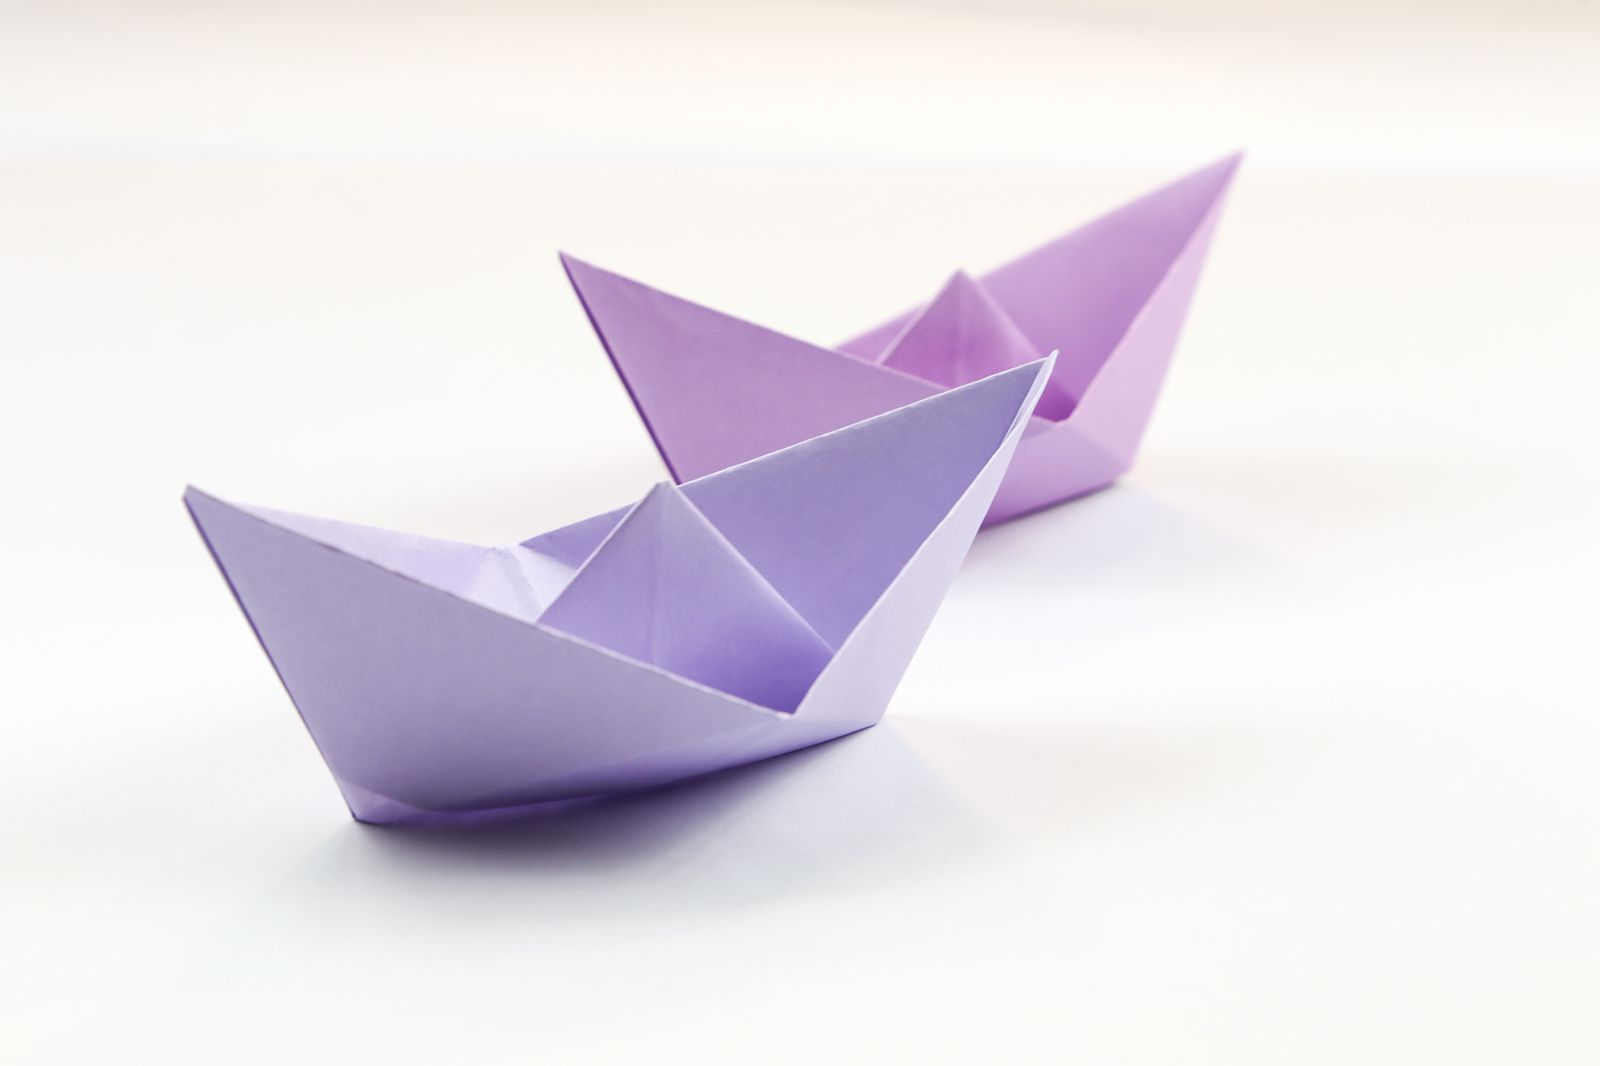 Origami Paper Boat How To Make An Easy Origami Boat